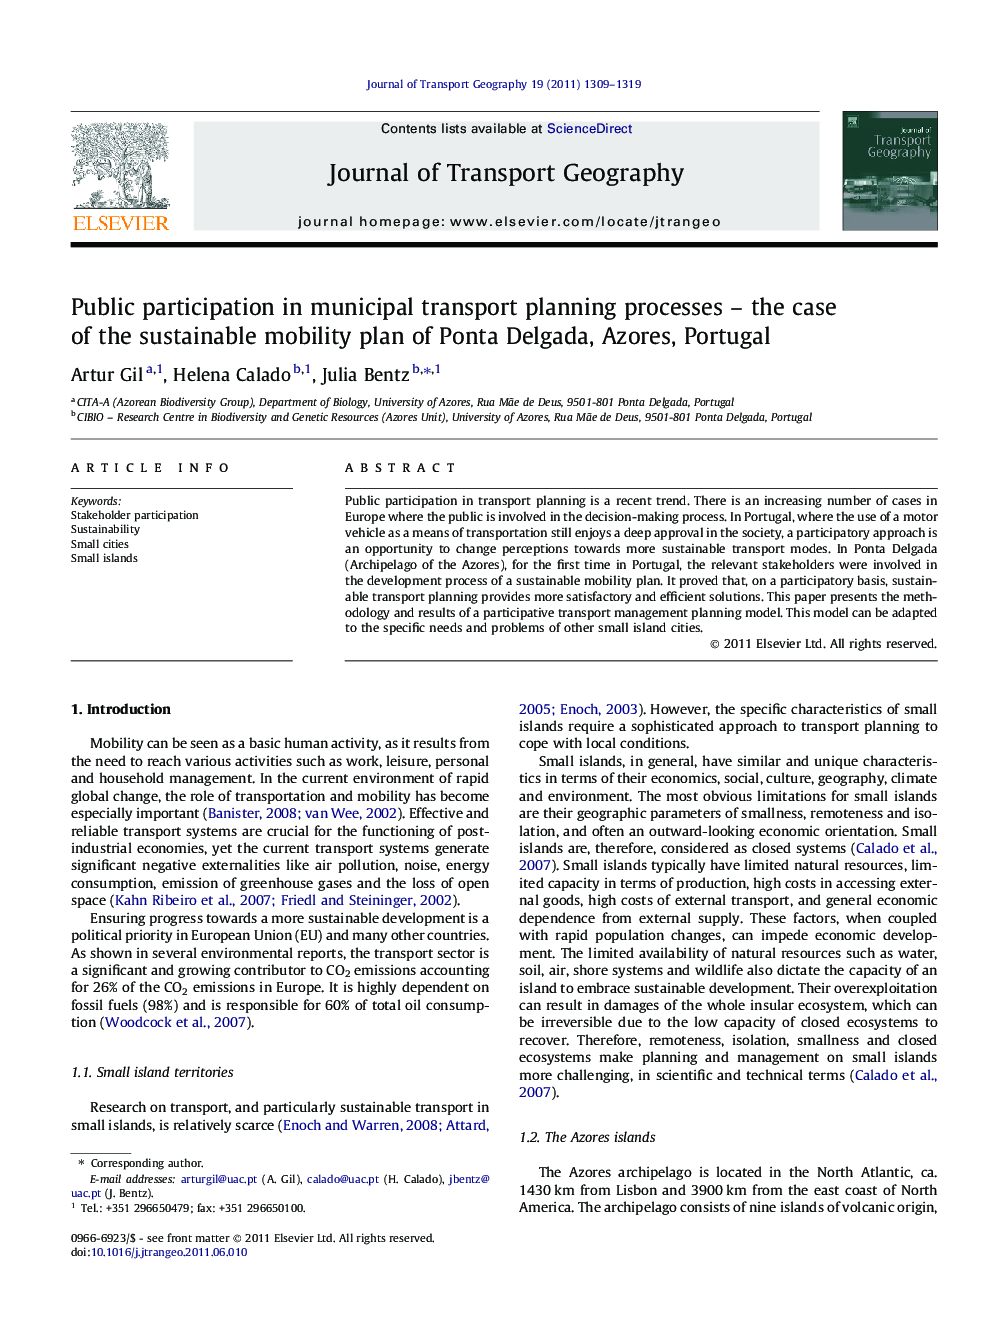 Public participation in municipal transport planning processes – the case of the sustainable mobility plan of Ponta Delgada, Azores, Portugal